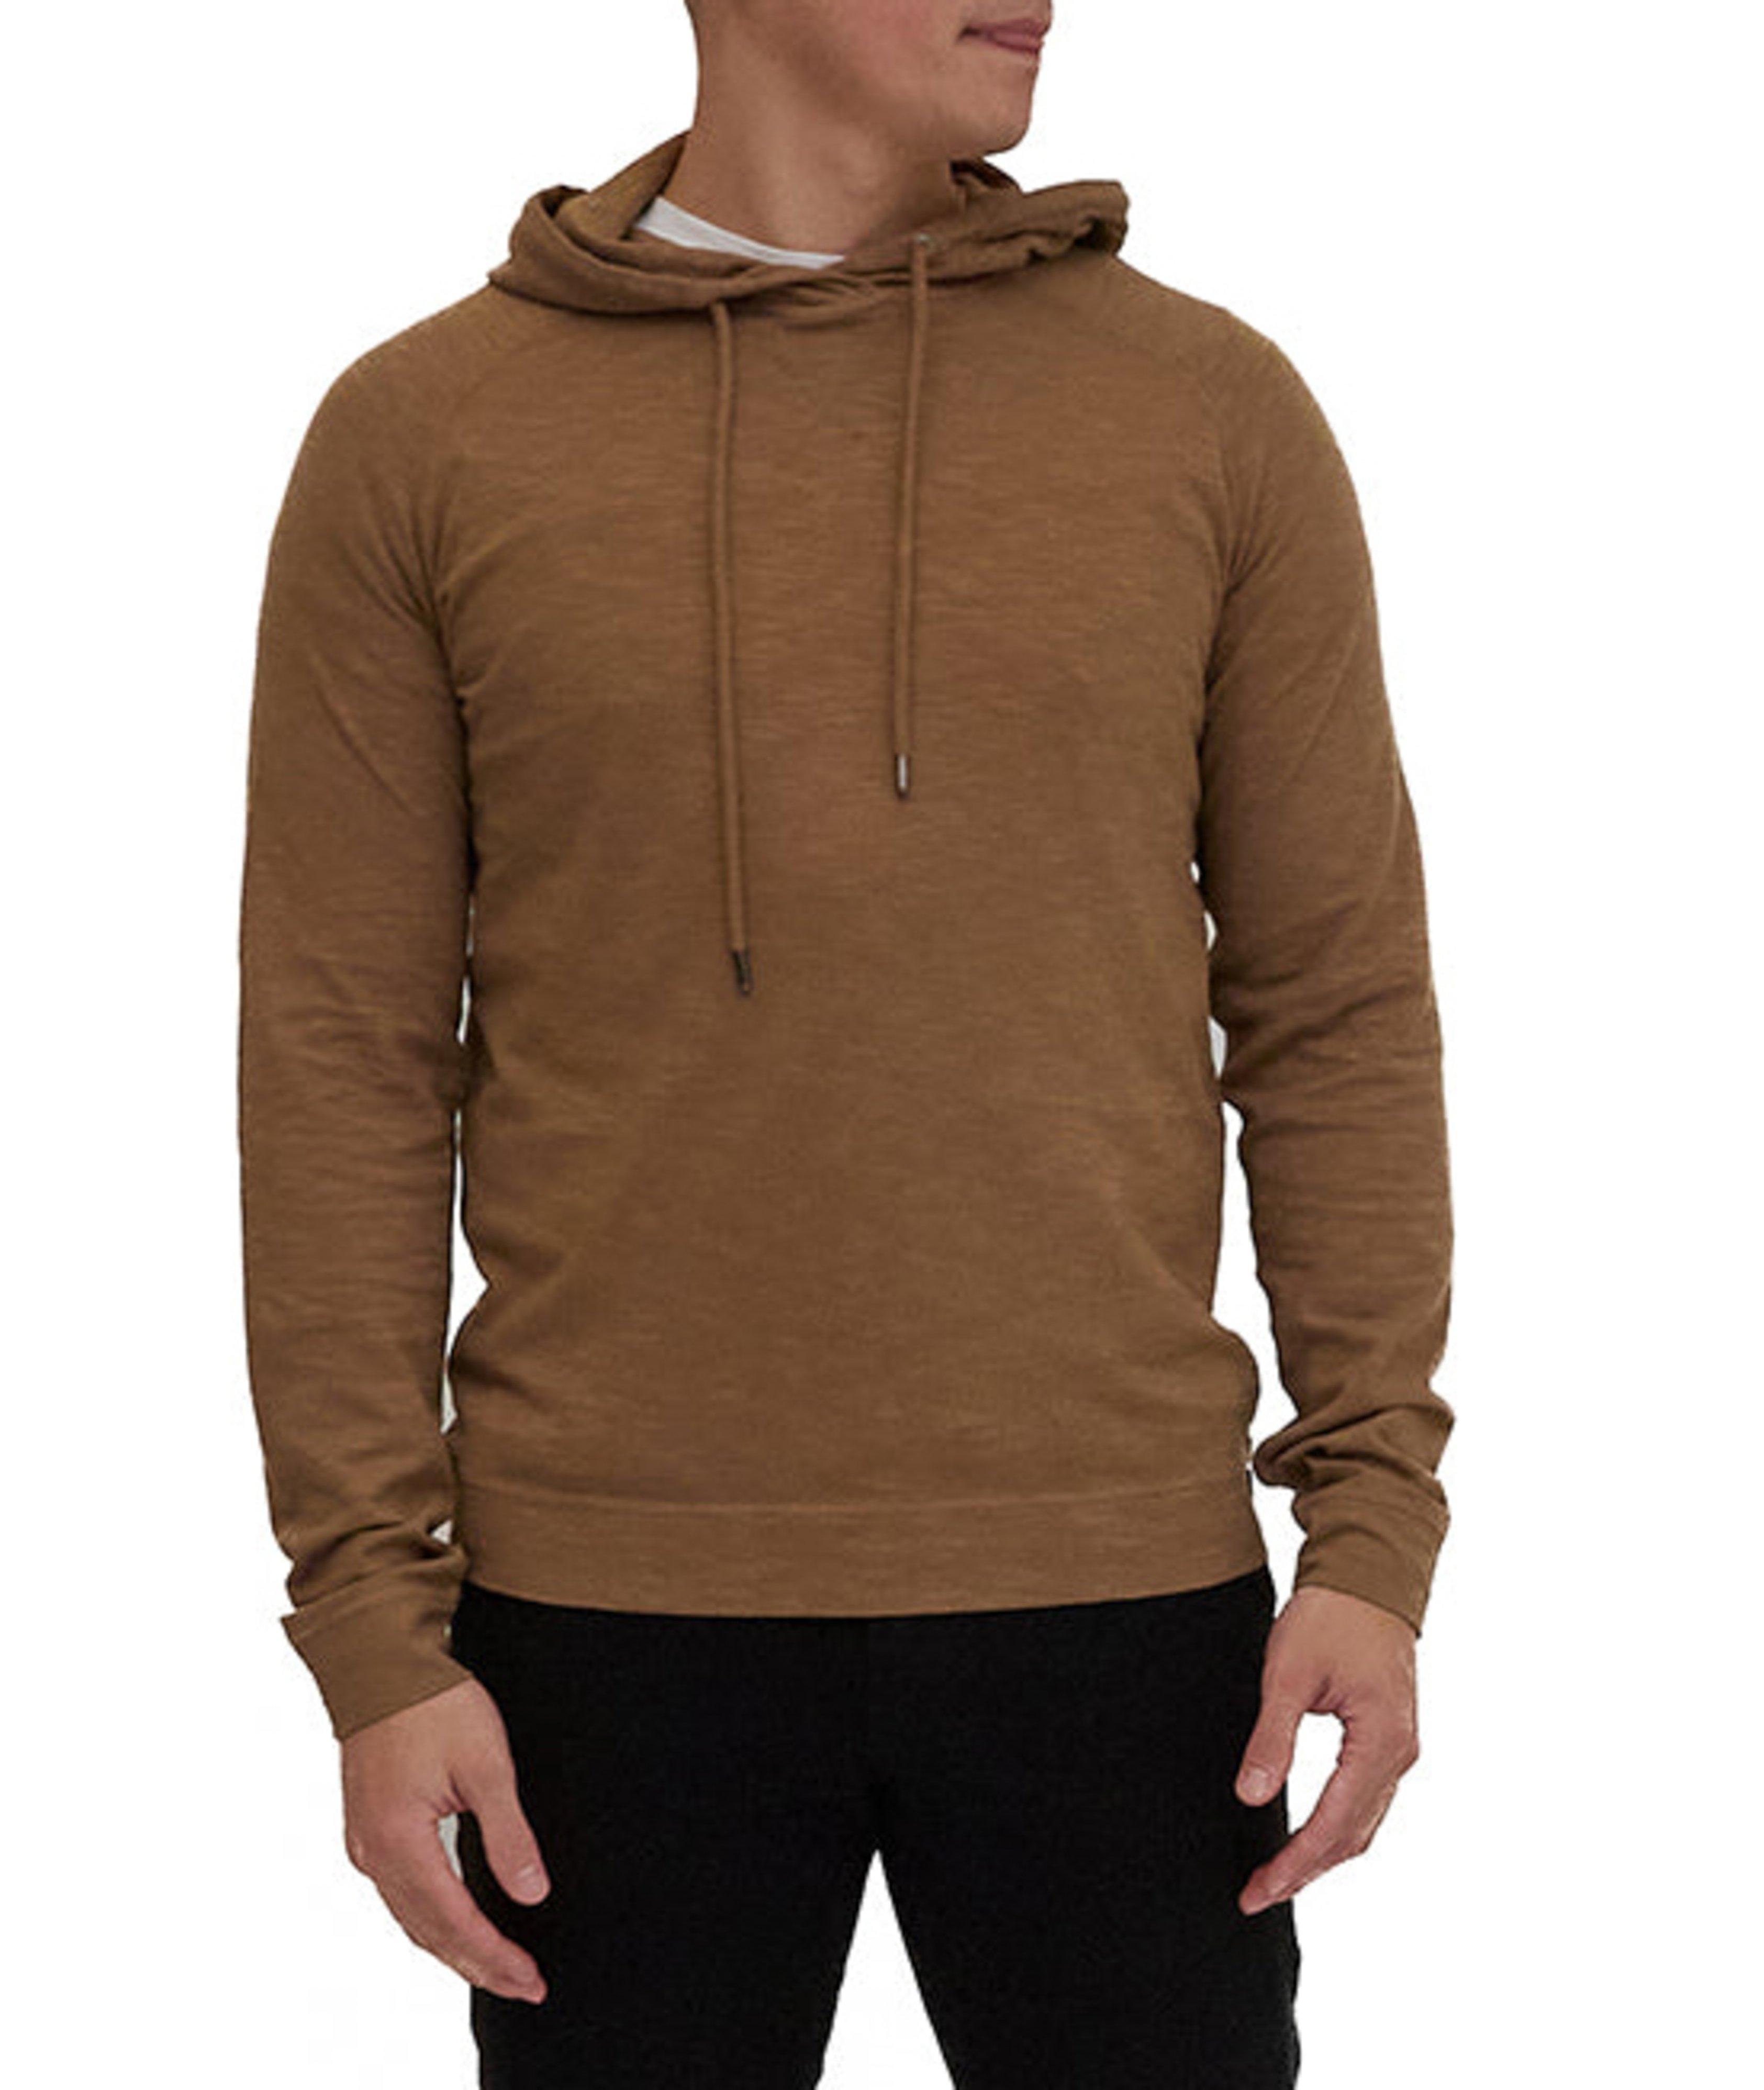 Legend Cotton Hooded Sweater